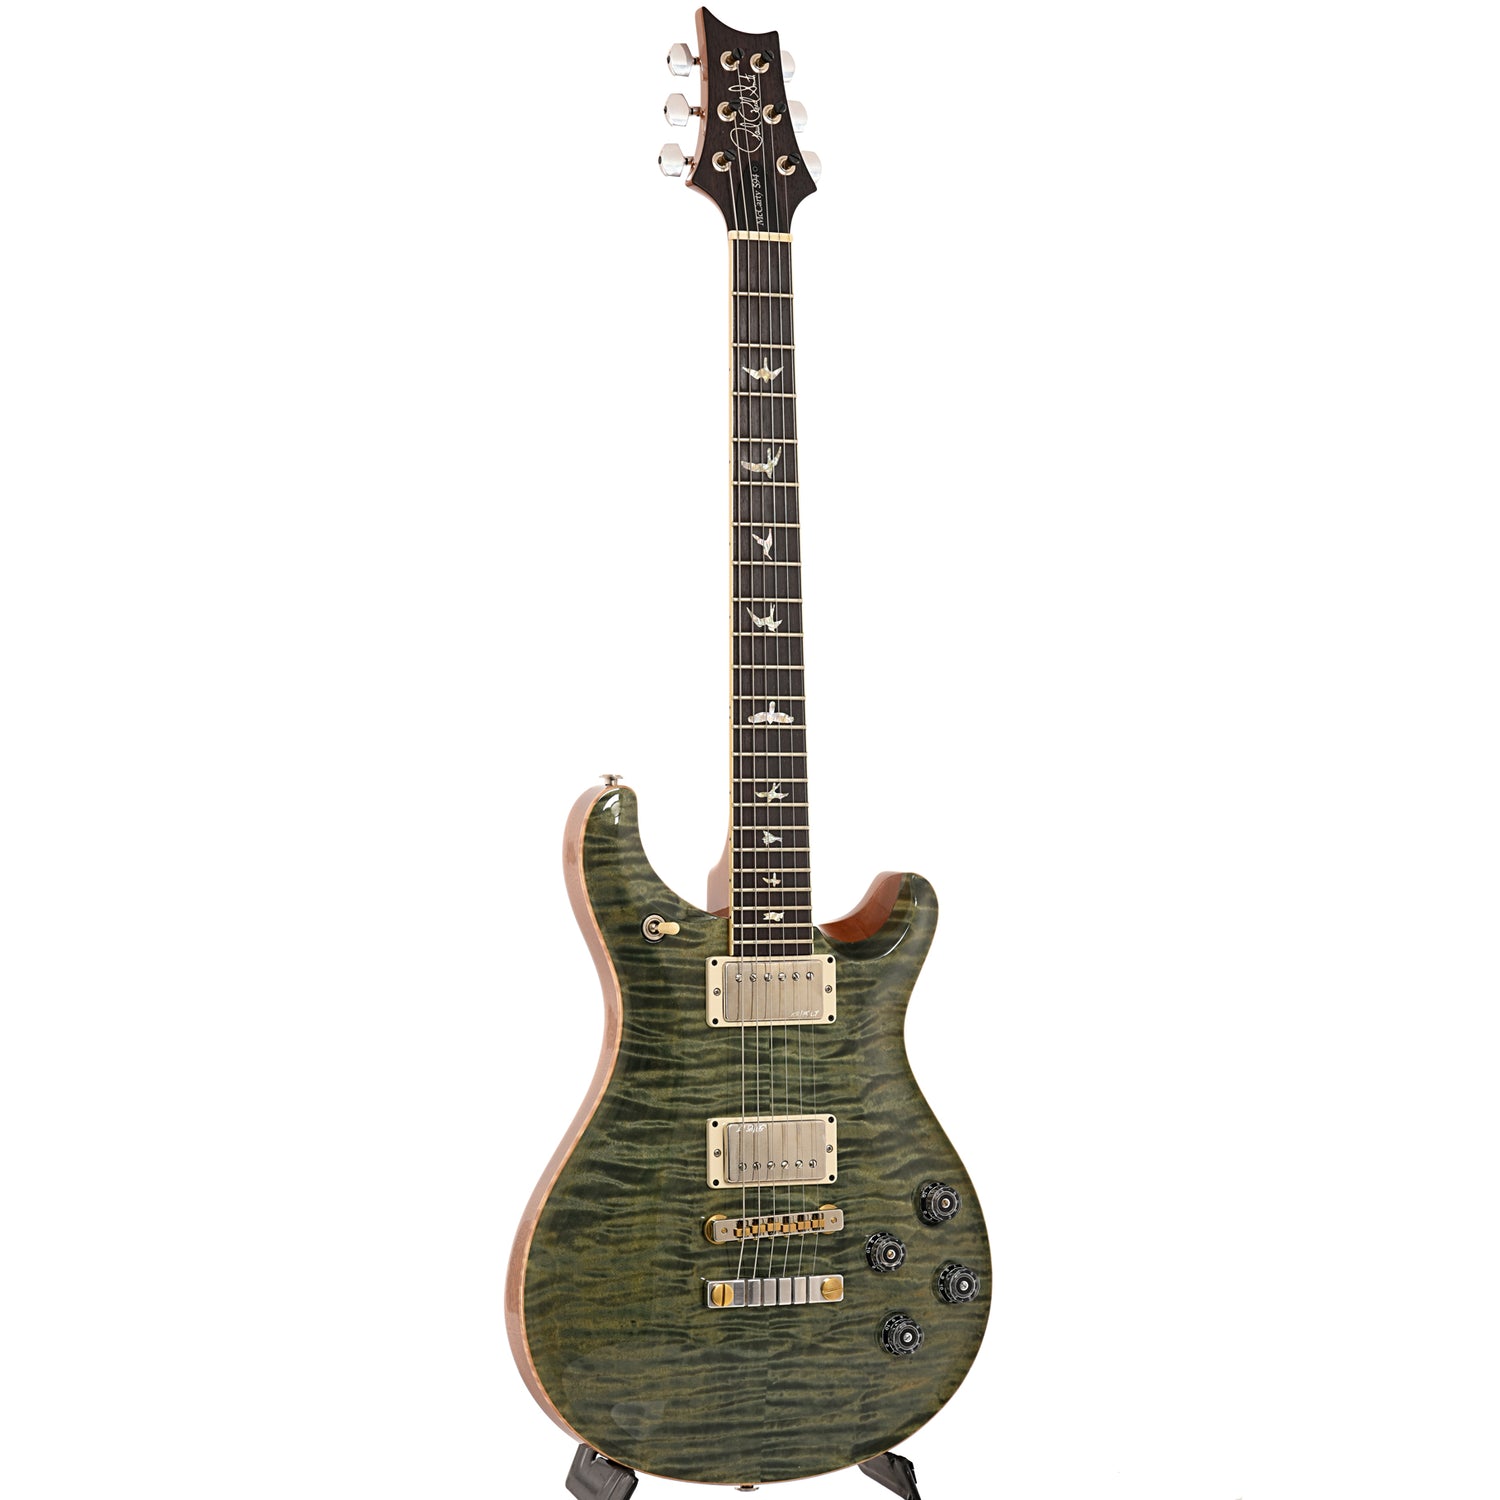 Full front and side of McCarty 594 10-Top